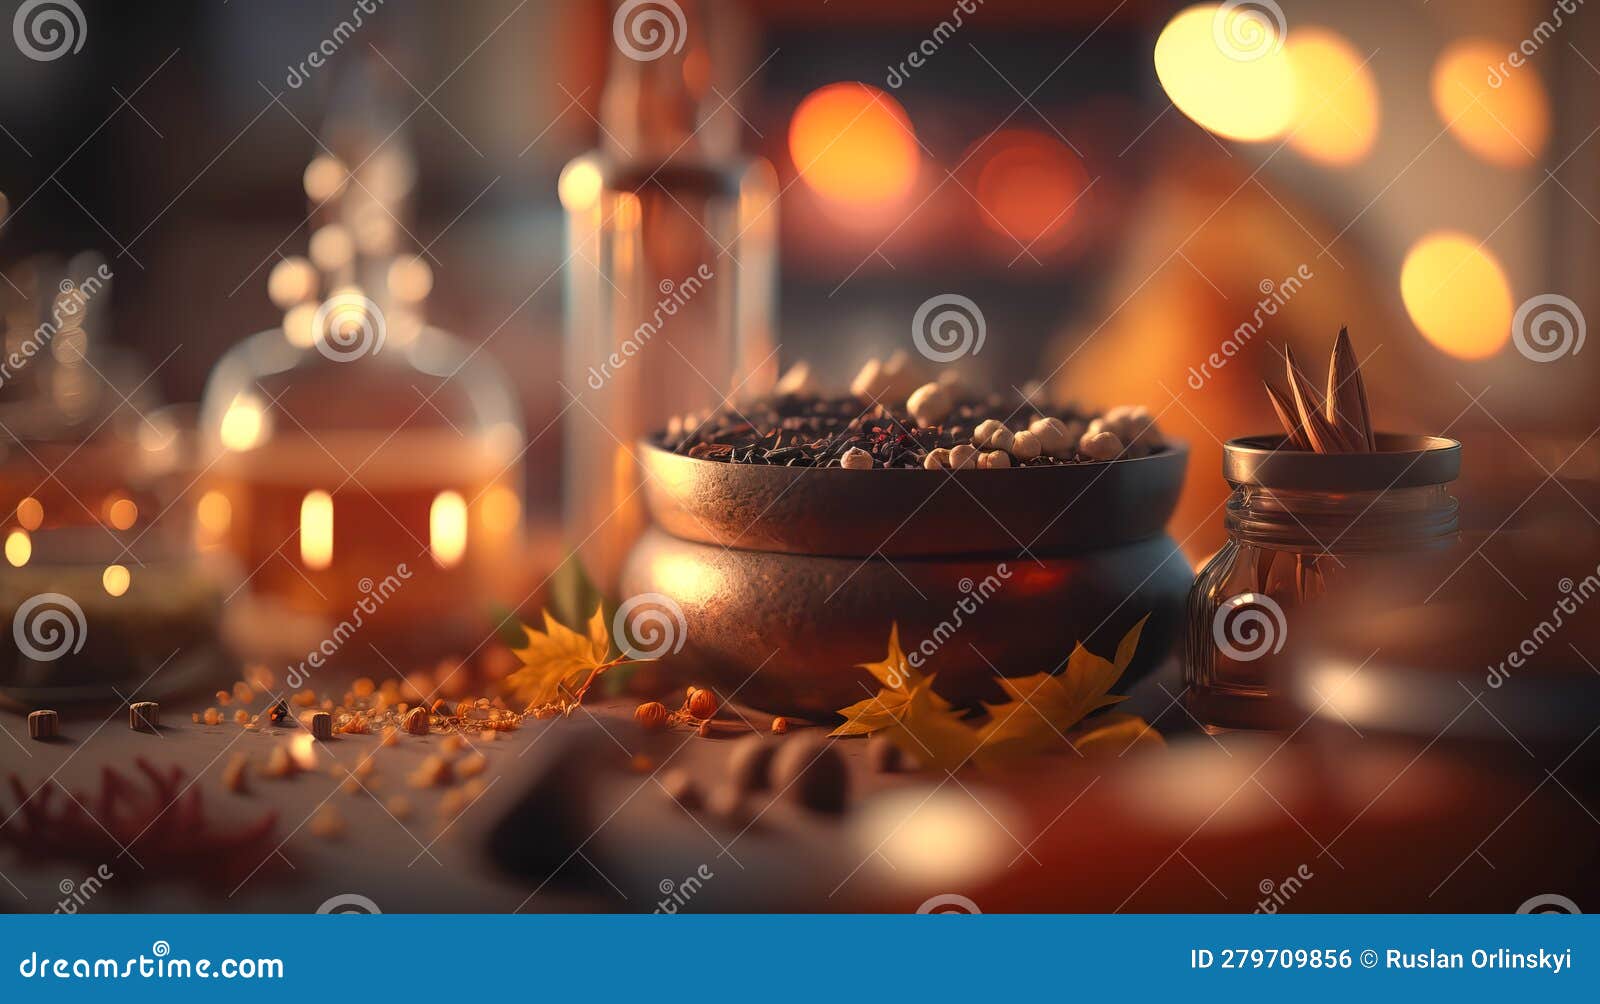 https://thumbs.dreamstime.com/z/spice-rack-essentials-comprehensive-set-spices-seasonings-home-chef-ai-generated-up-your-meals-colorful-279709856.jpg